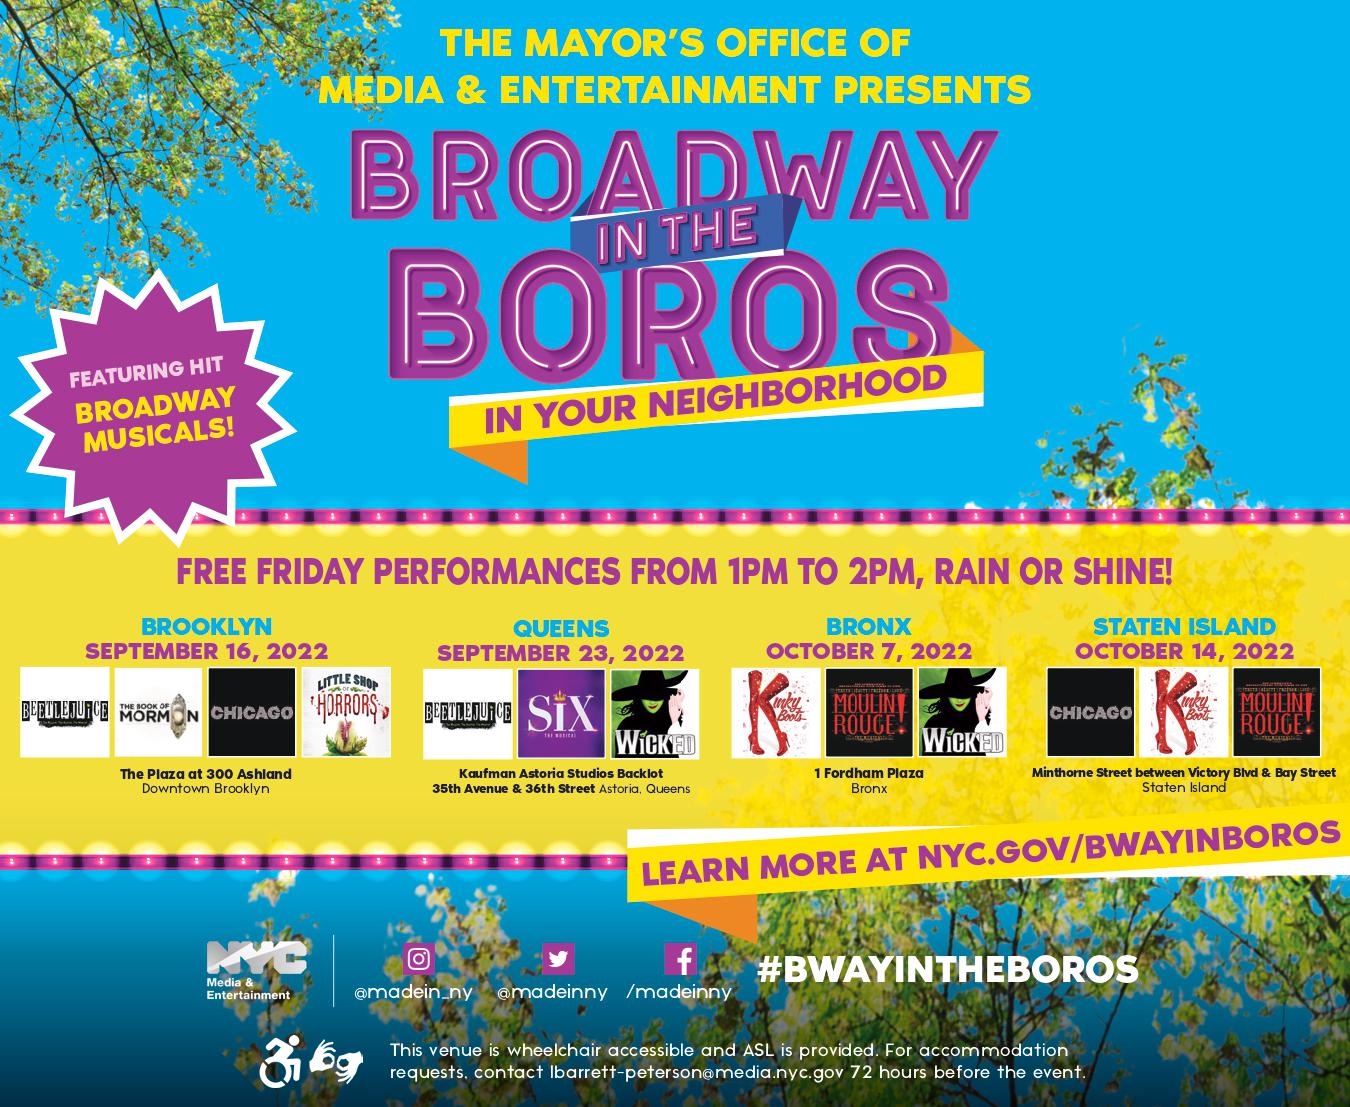 Broadway in the Boros graphics with list of productions performing this fall